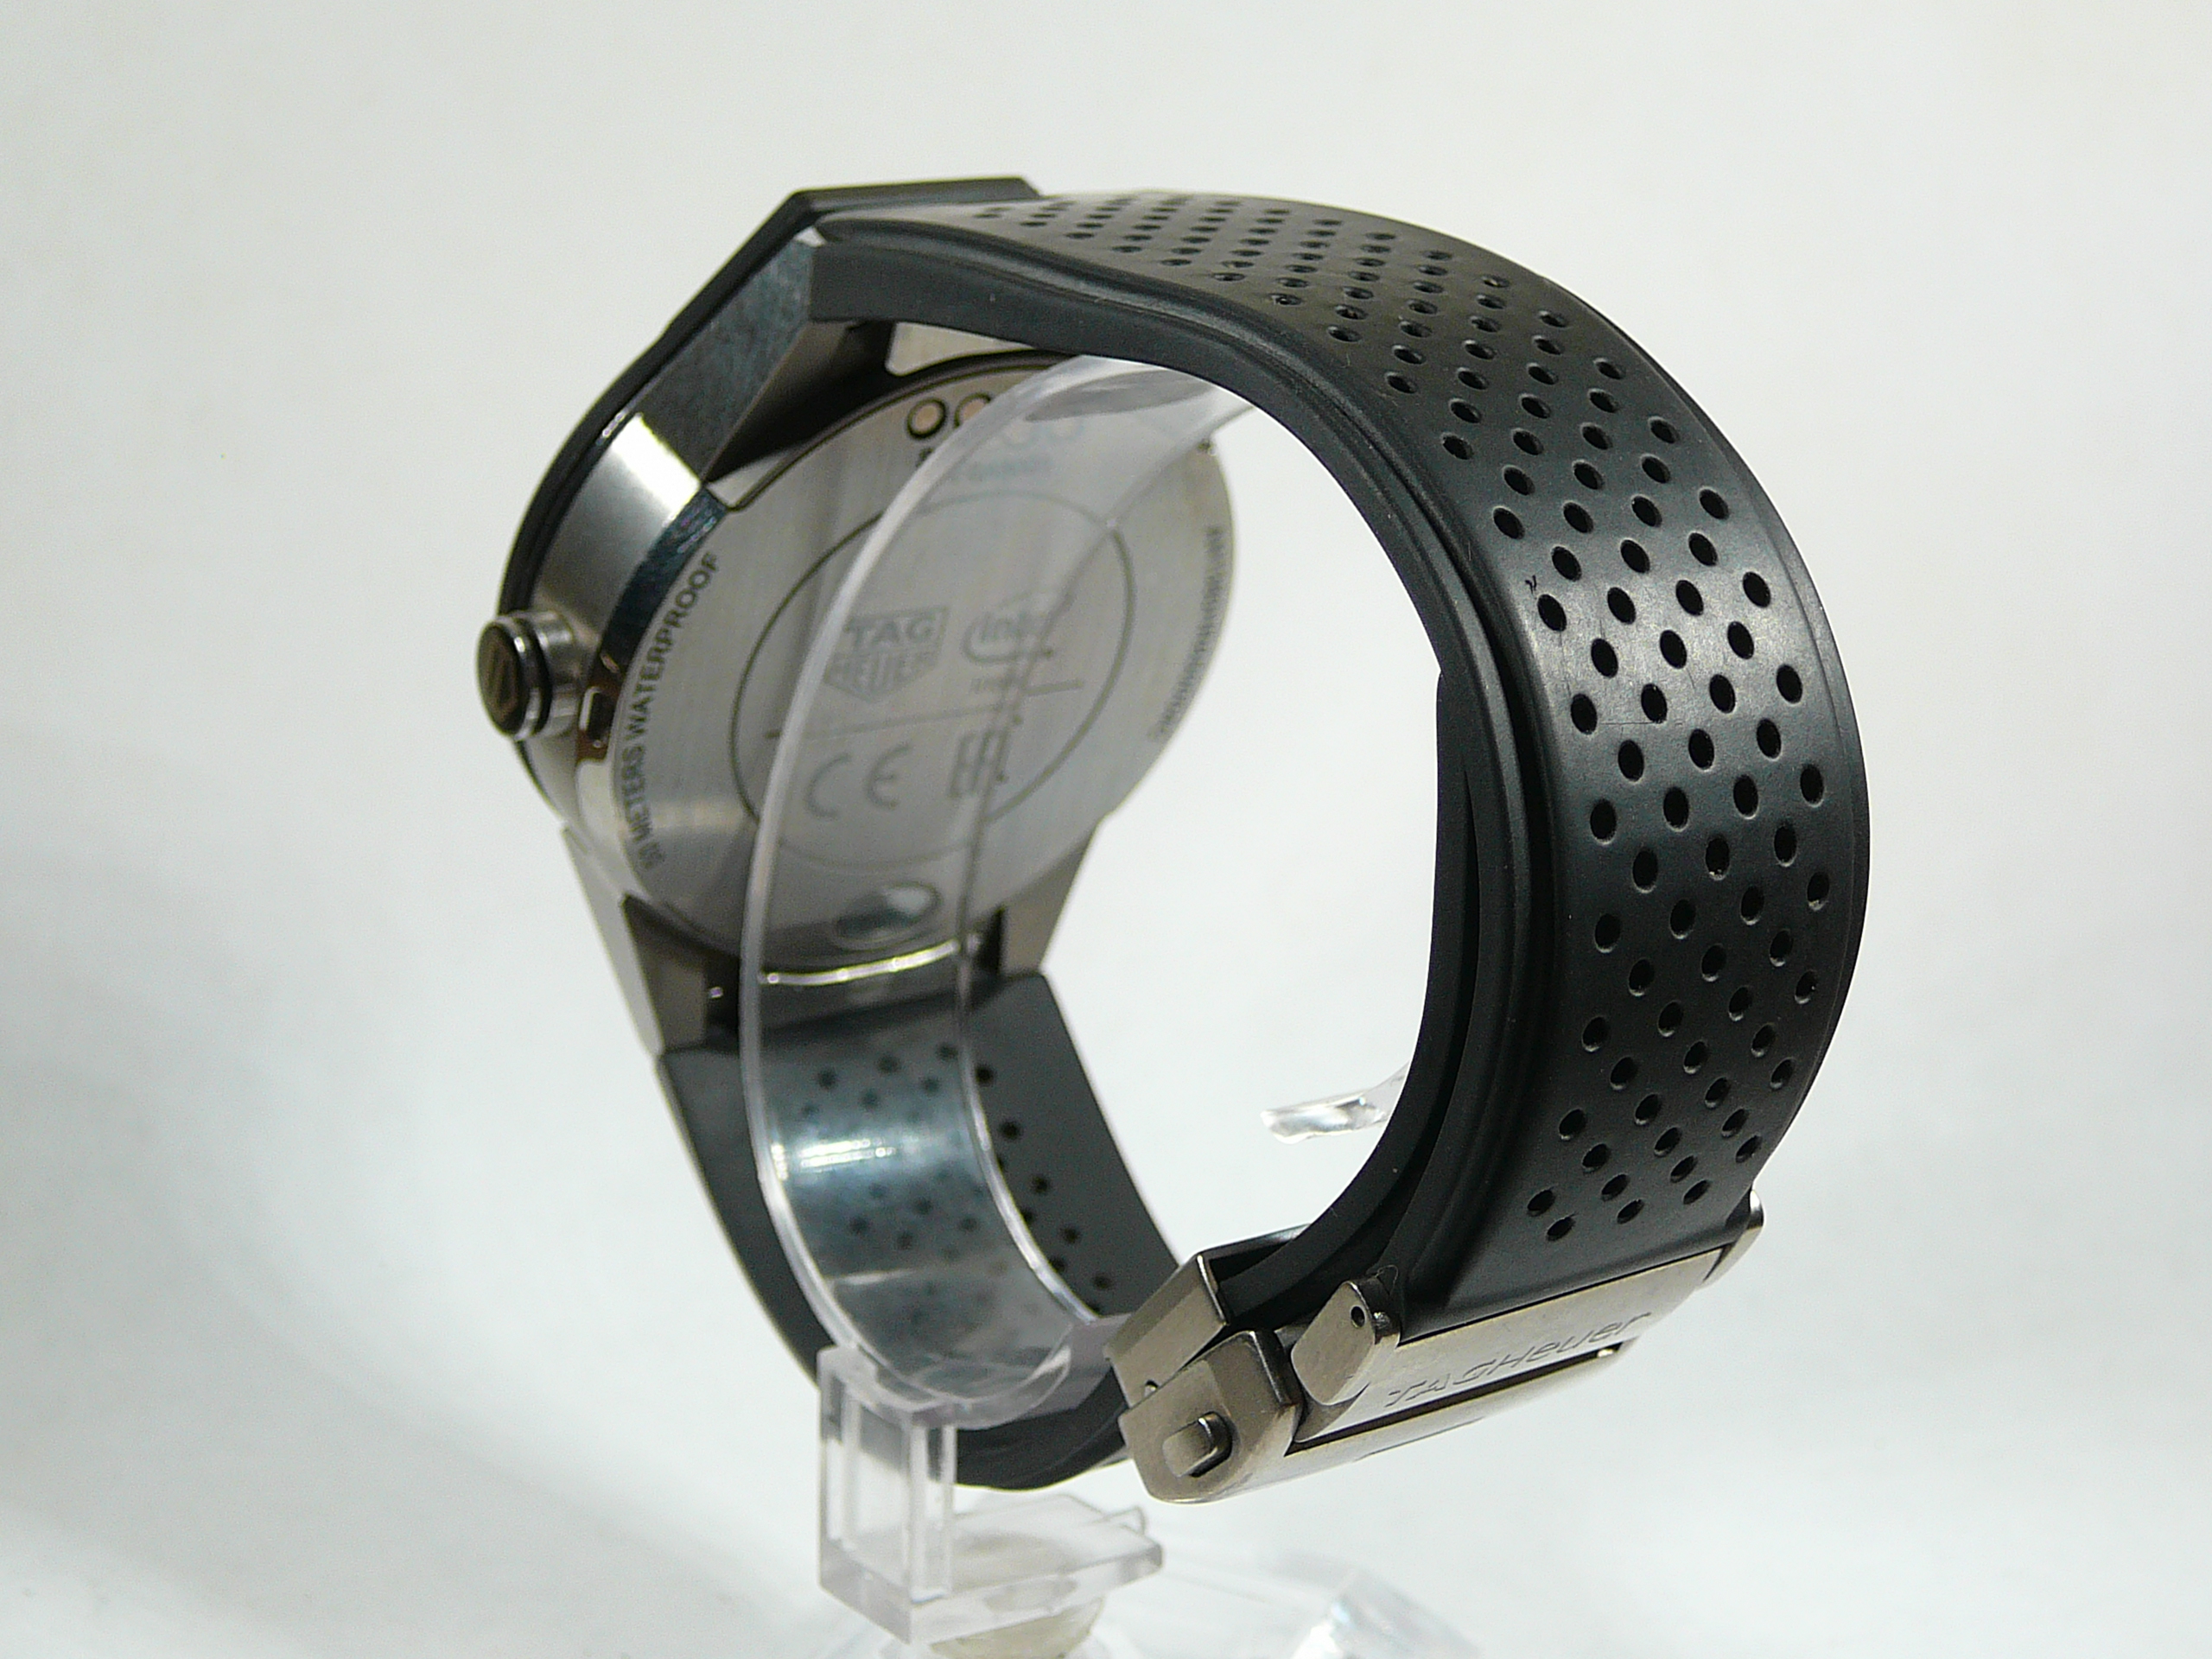 Tag Heuer Smart Watch - Image 3 of 3